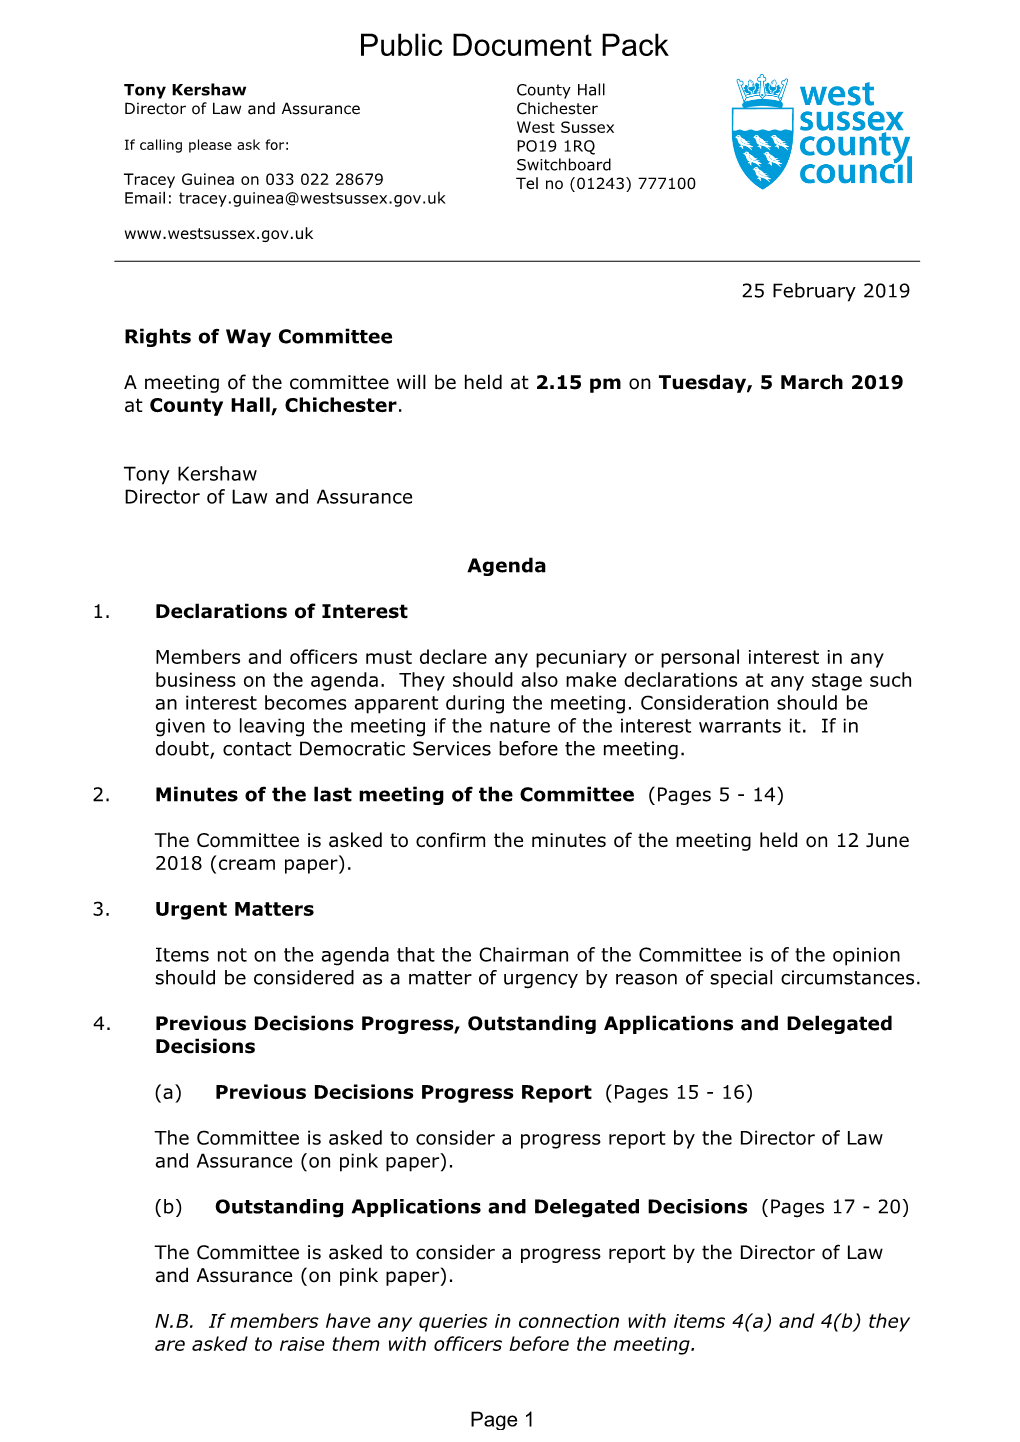 (Public Pack)Agenda Document for Rights of Way Committee, 05/03